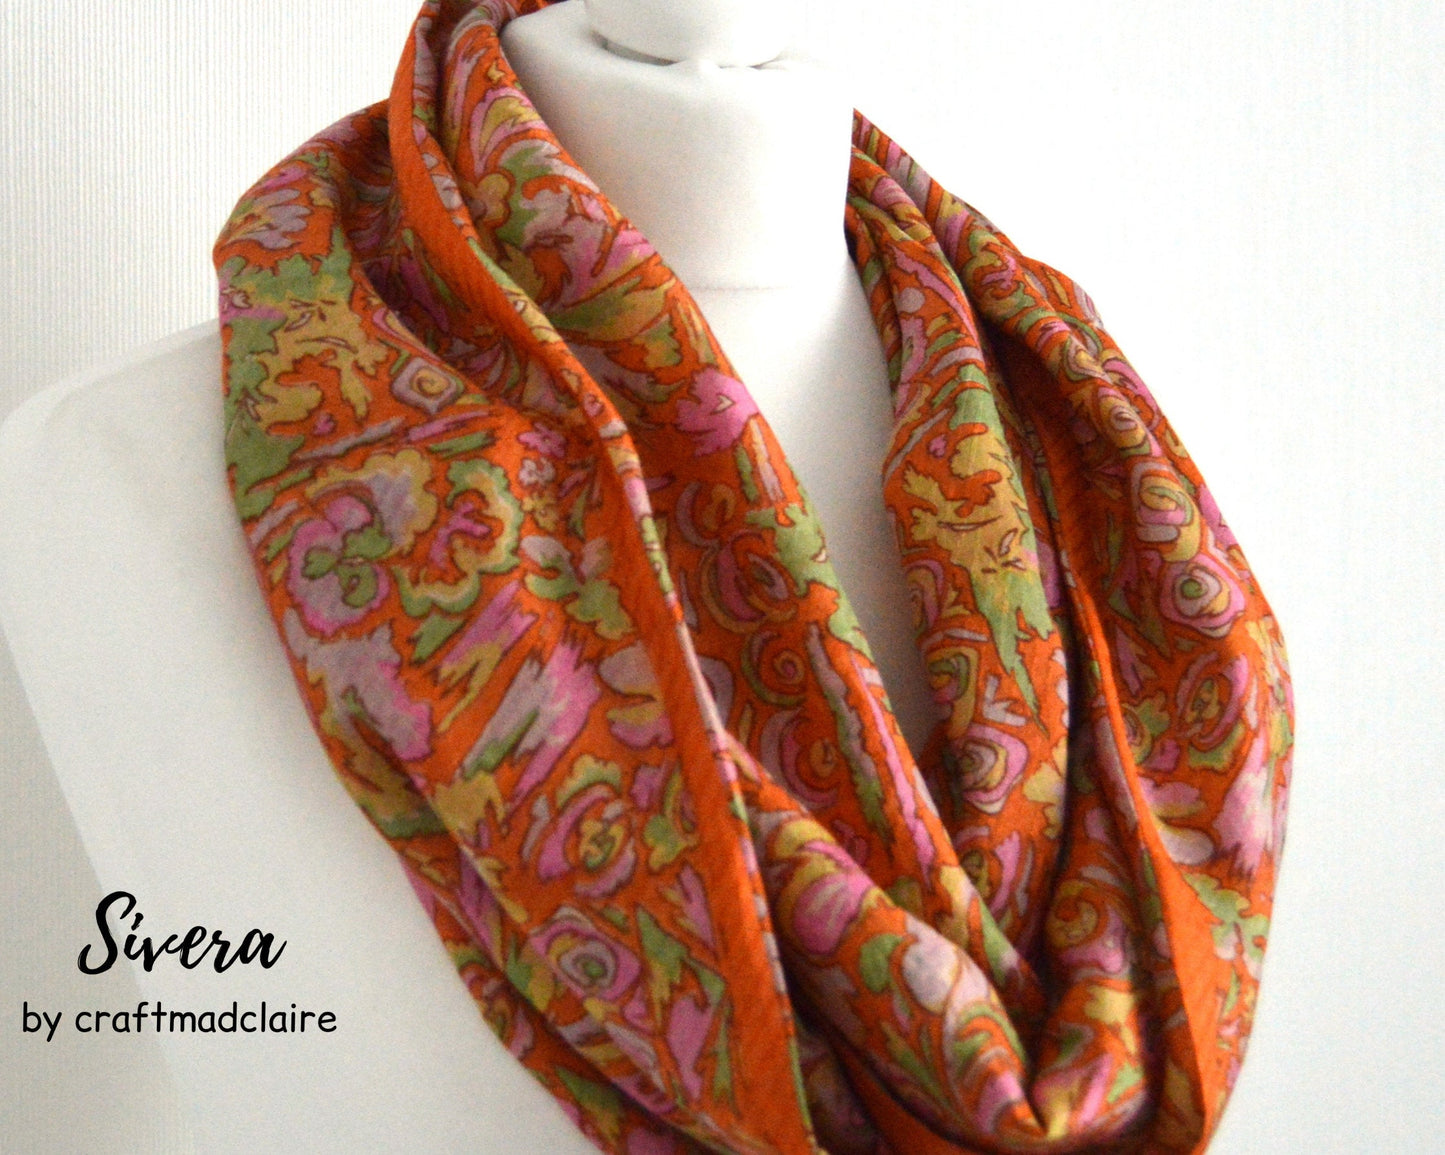 Orange Upcycled Vintage Sari Silk Scarf - Bohemian Autumn Fall Winter Womens Scarf - Eco Friendly Christmas Gift For Her Mum Mom Sister